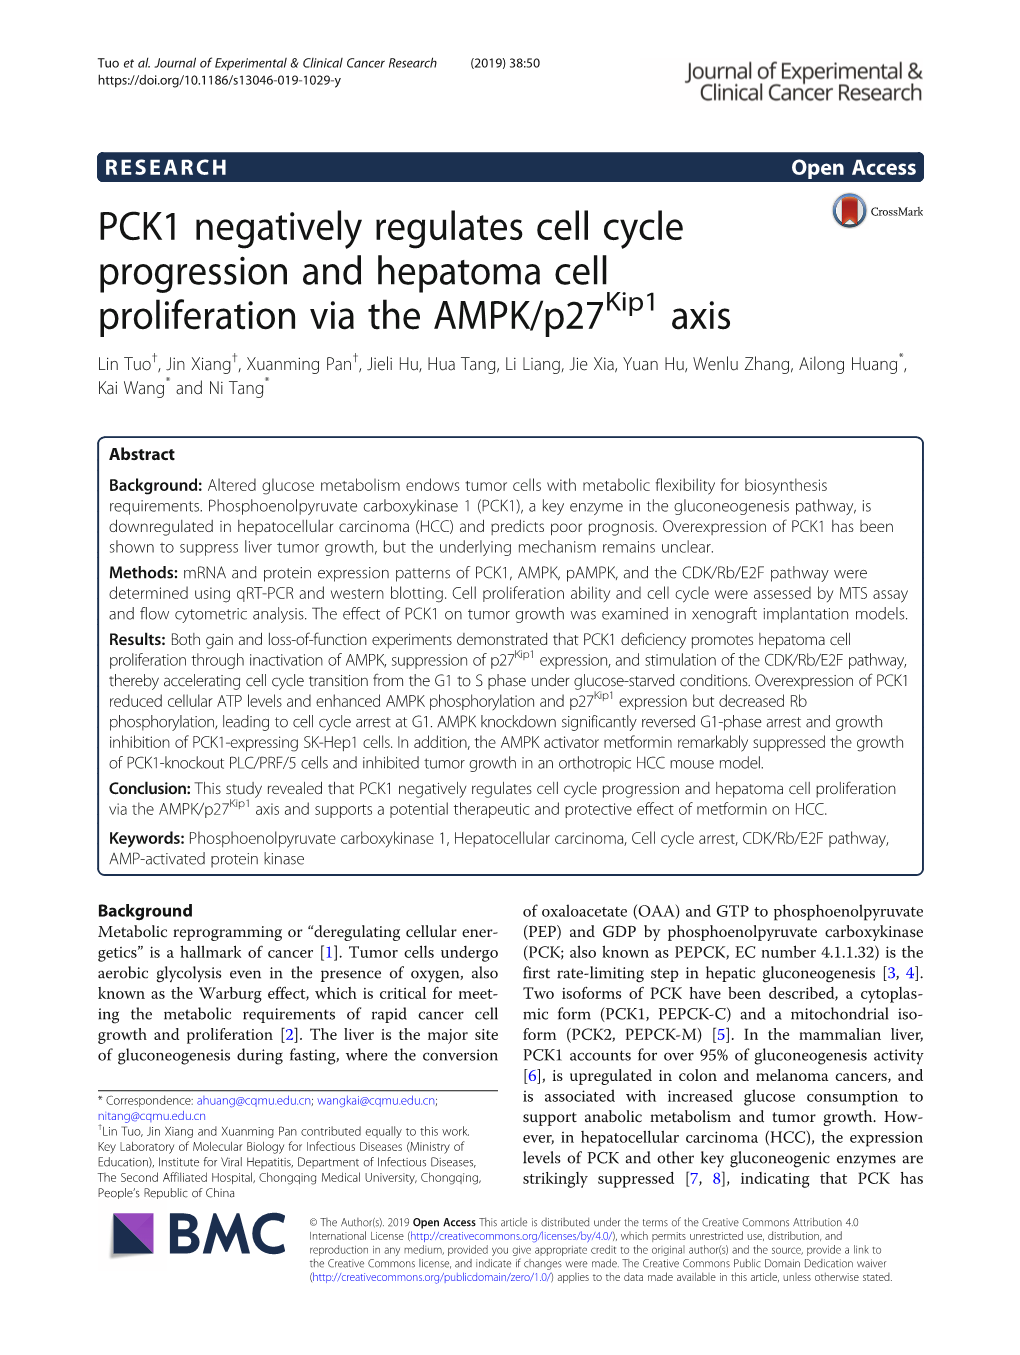 PCK1 Negatively Regulates Cell Cycle Progression and Hepatoma Cell